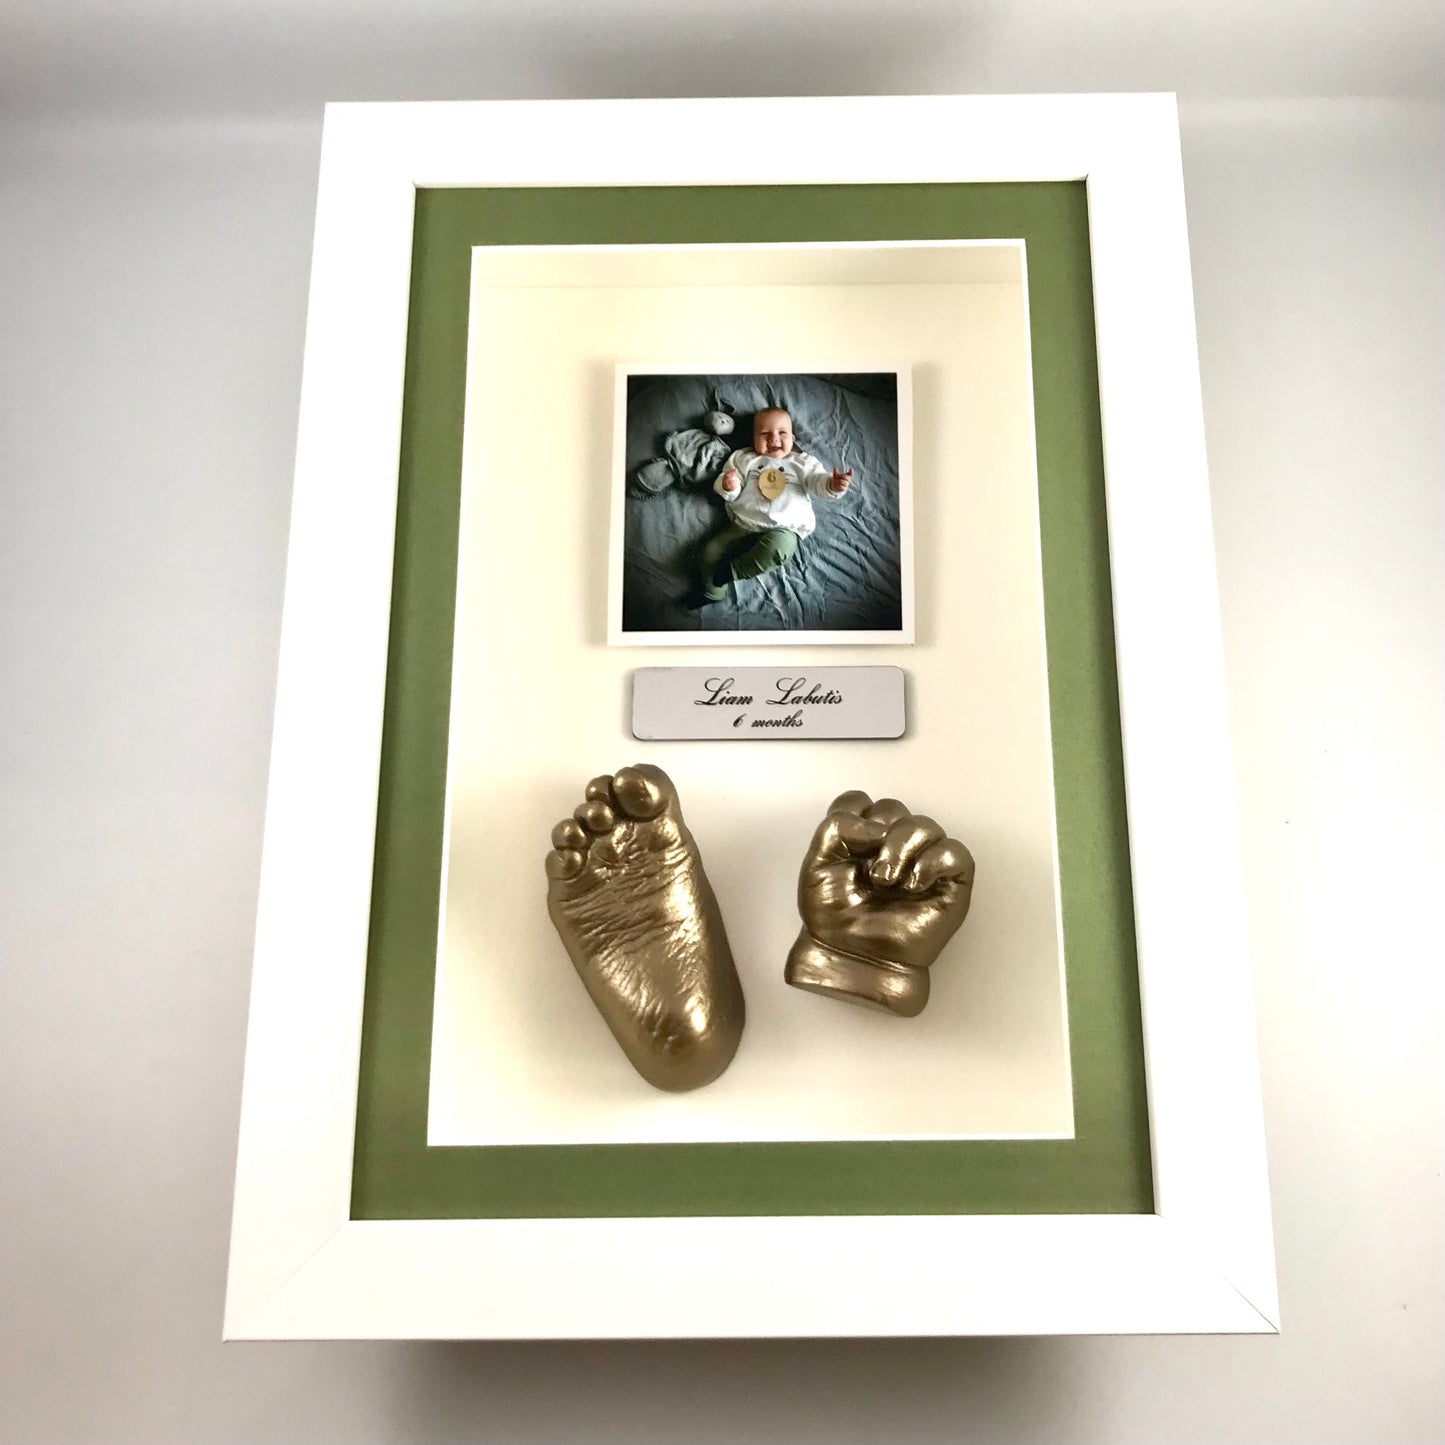 3D Framed Hand And Foot Casts With Photo